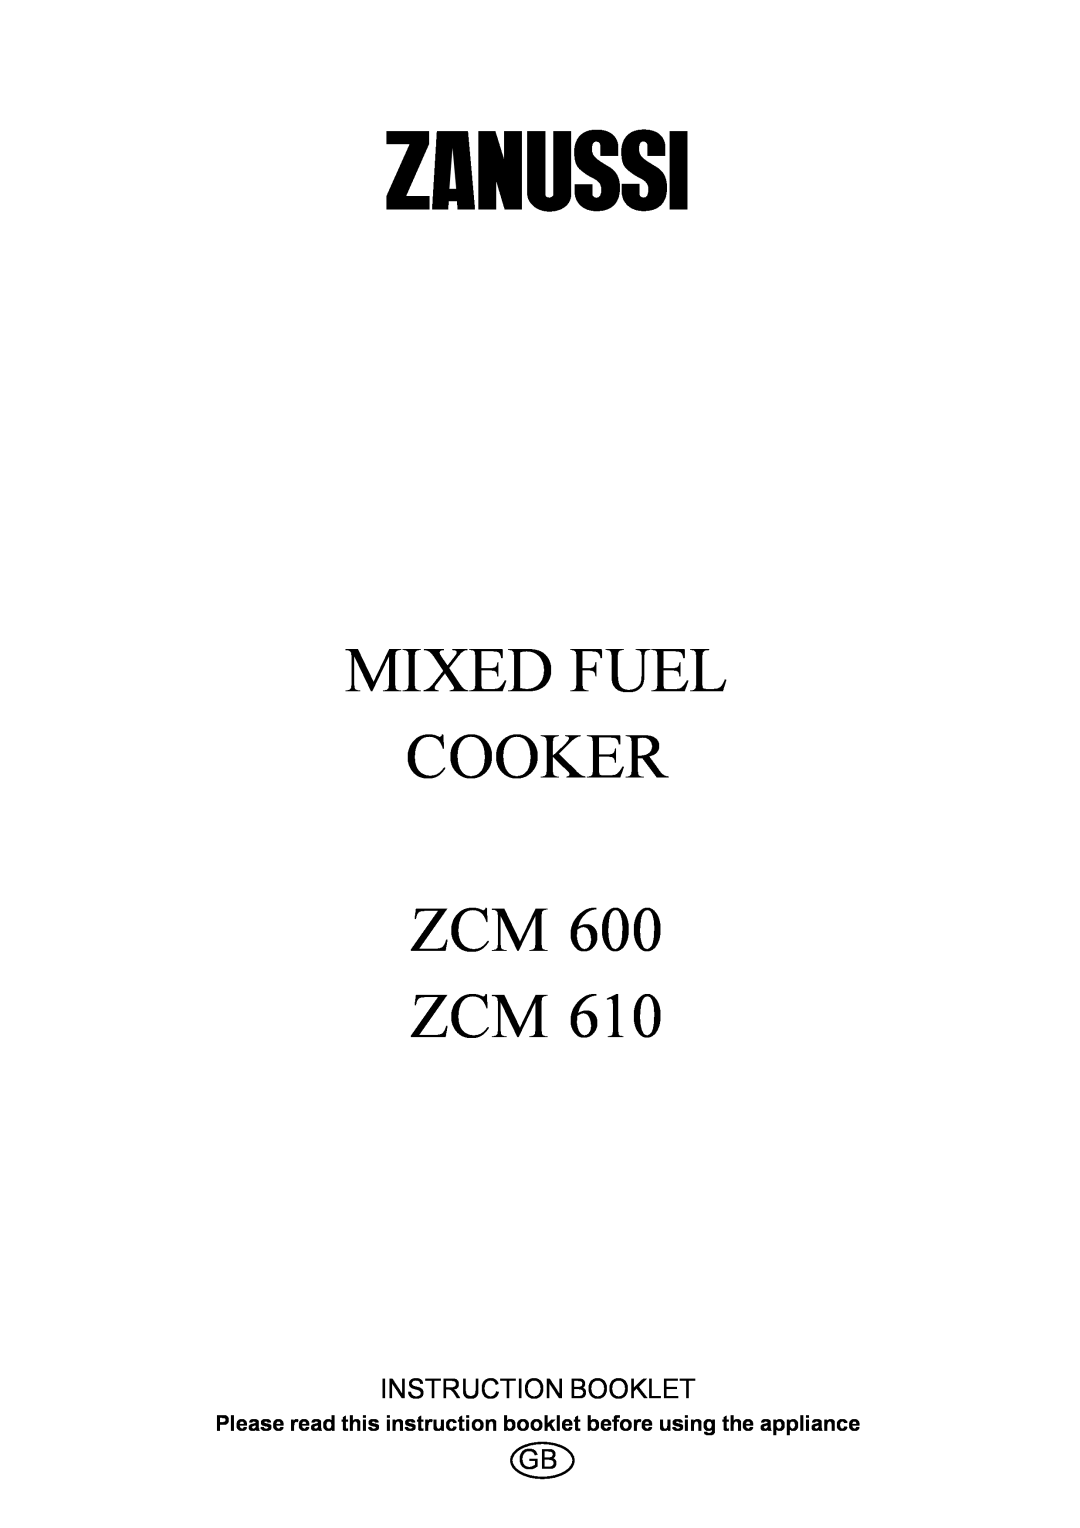 Zanussi ZCM 600, ZCM 610 manual Please read this instruction booklet before using the appliance, Mixed Fuel Cooker Zcm Zcm 